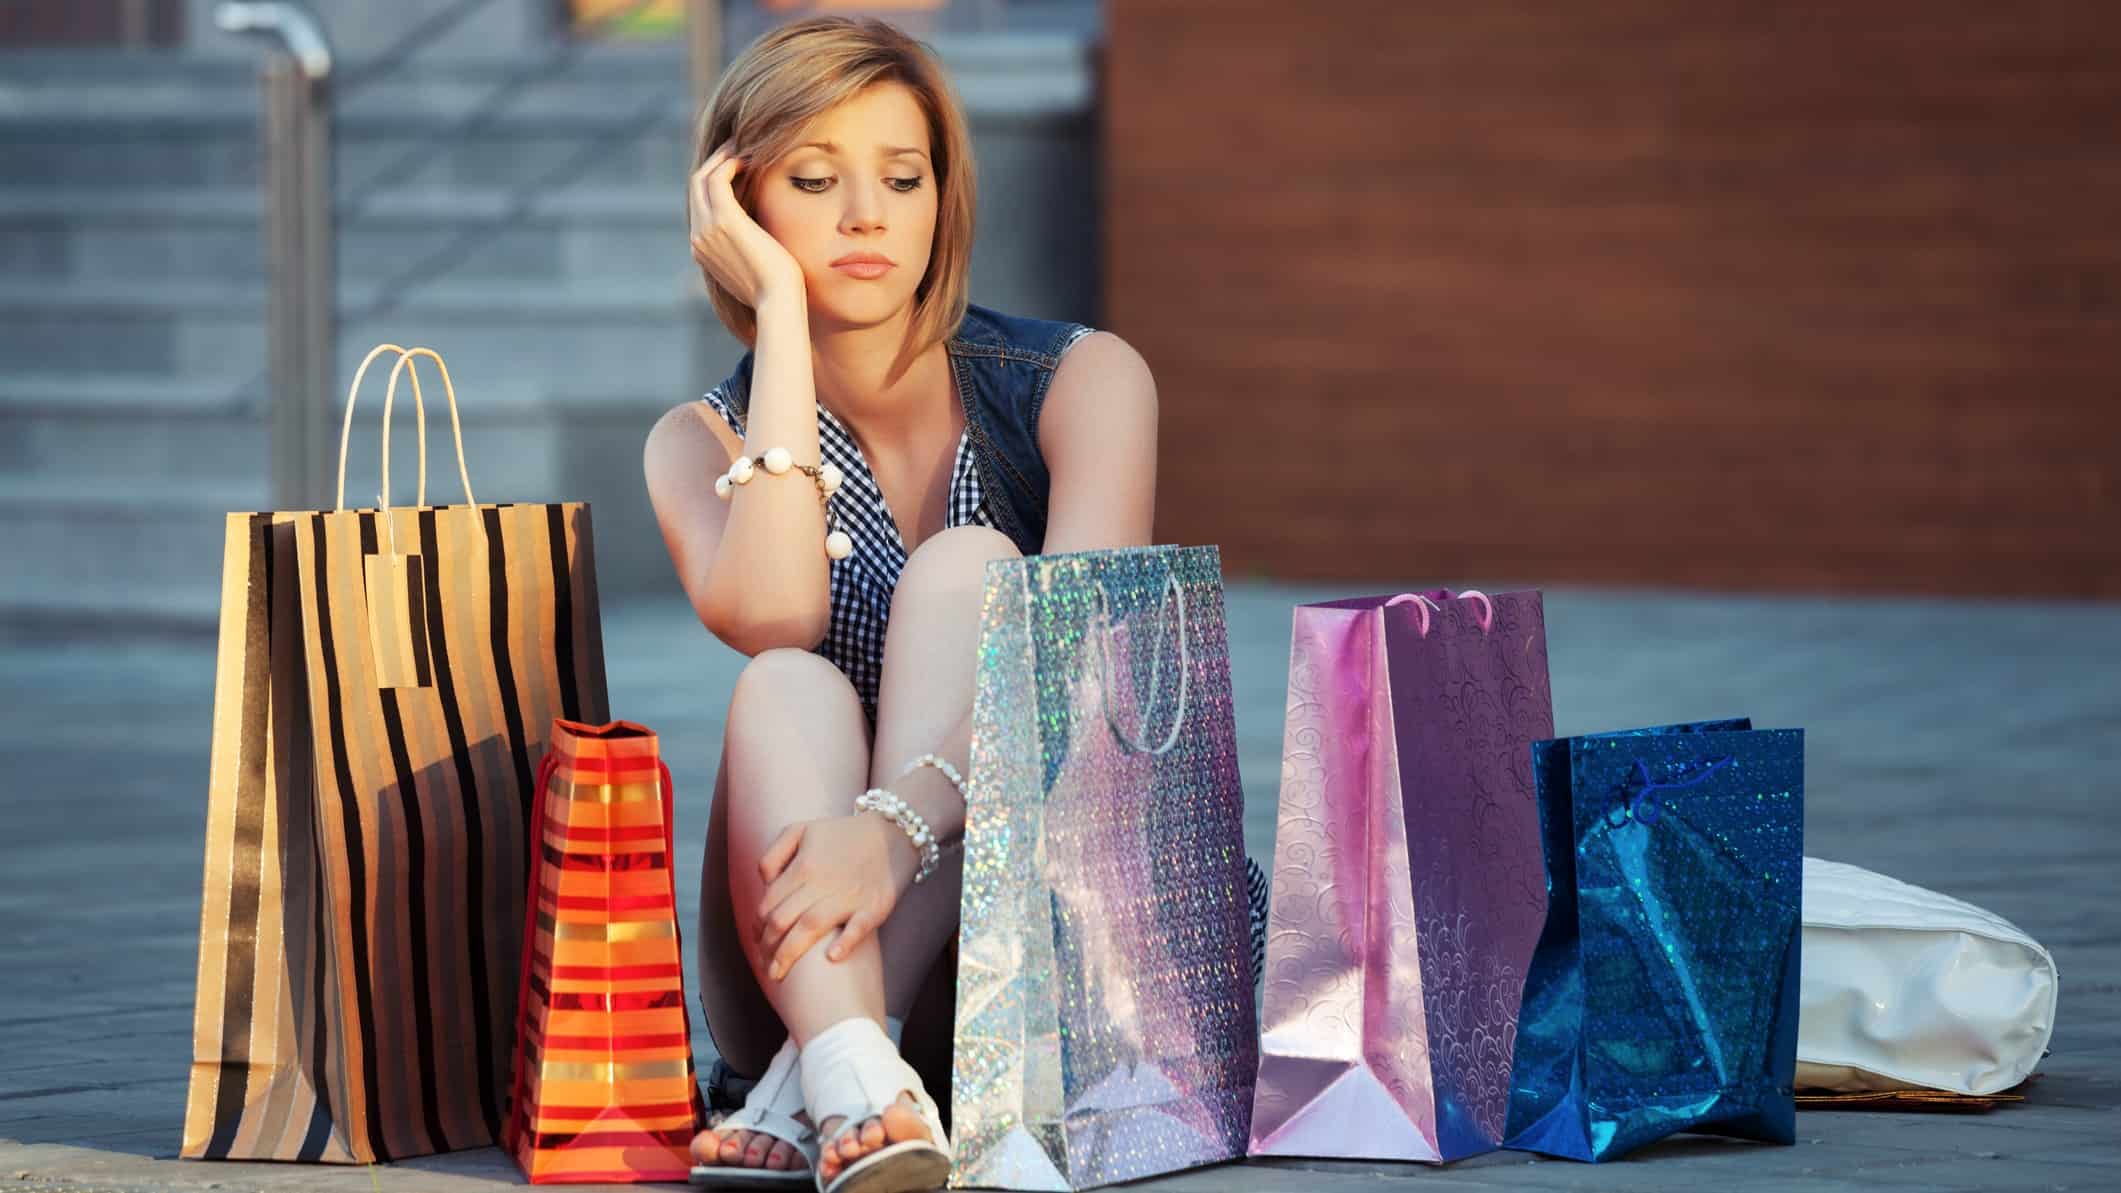 sad woman sitting with shopping bags